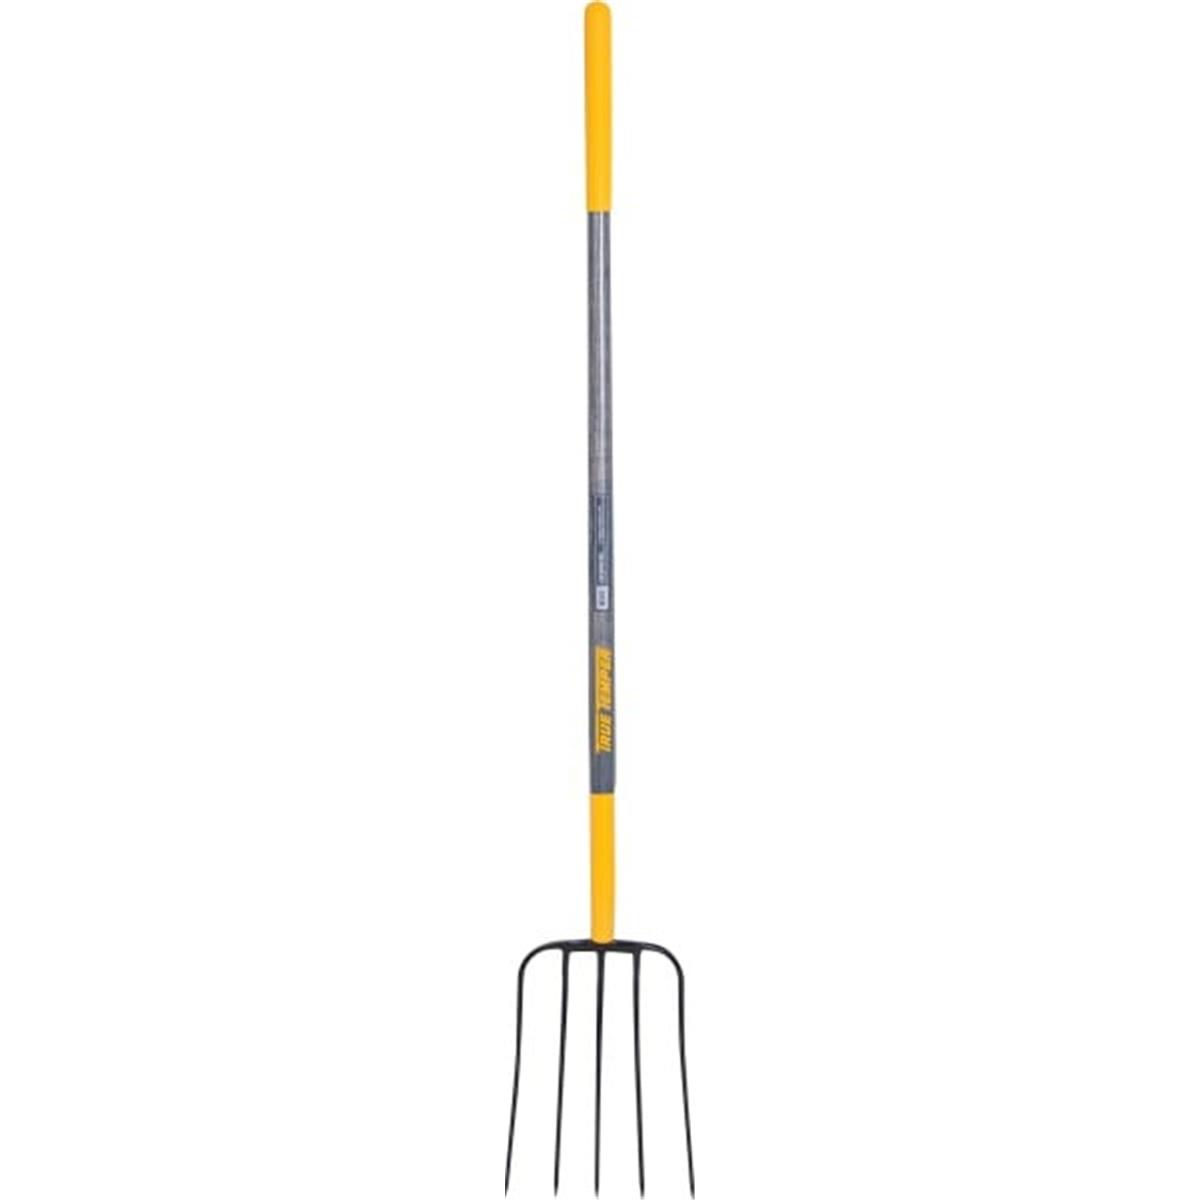 Picture of BFG2 AME2812300 61 in. 5-Tine Forged Manure Fork with Cushion End Grip on Hardwood Handle